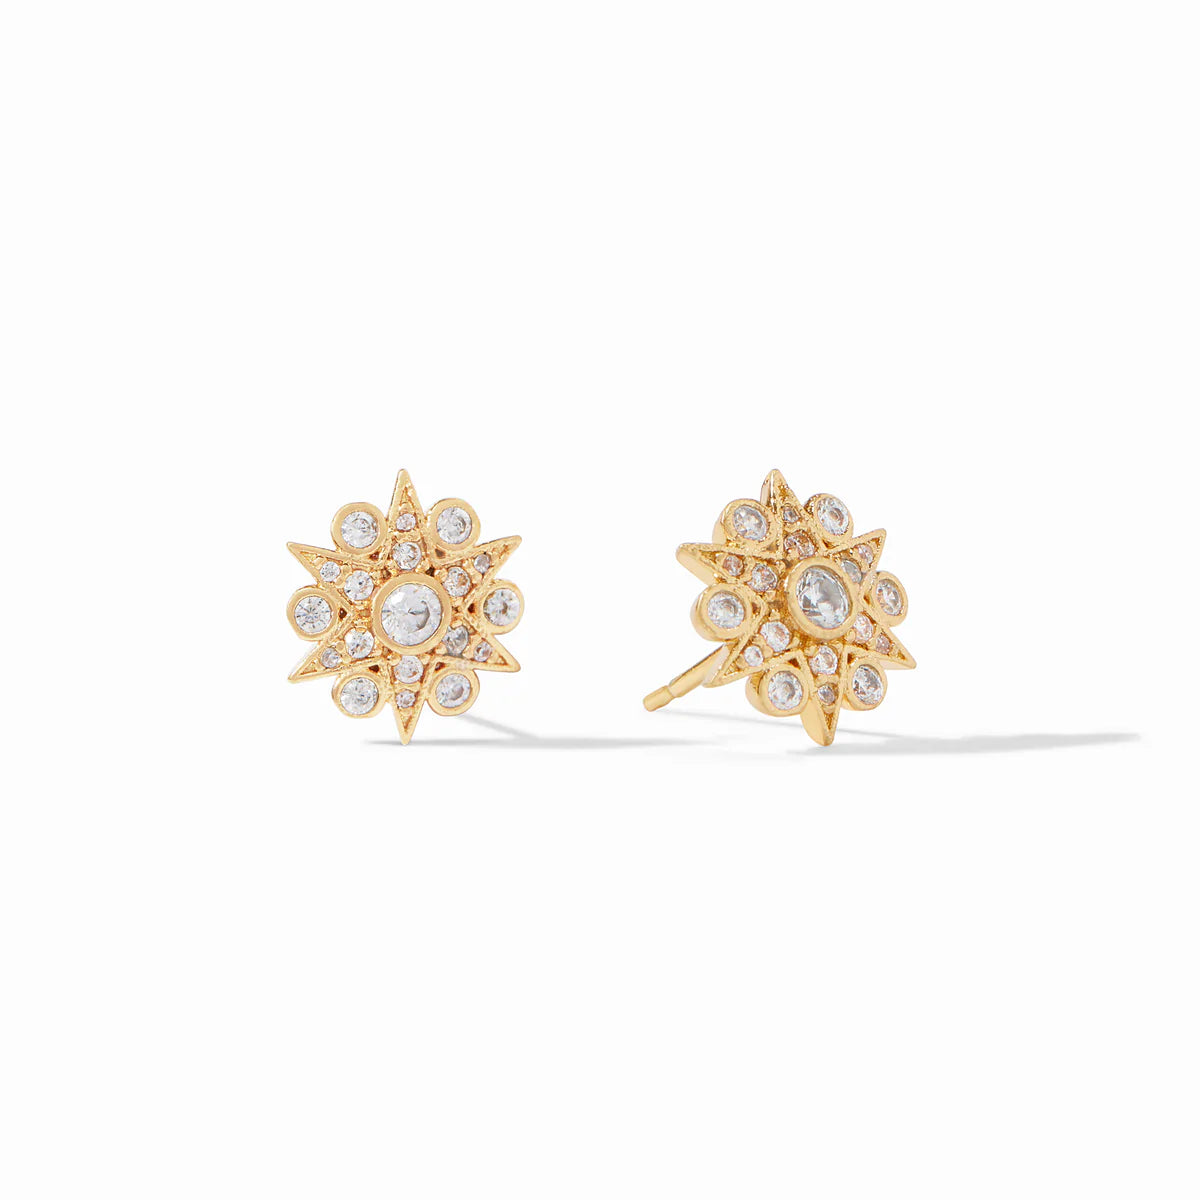 Celeste Demi Stud by Julie Vos star studs feature multiple cubic zirconia gem stones framed in 24K gold plate. Shop at The Painted Cottage in Edgewater, MD.